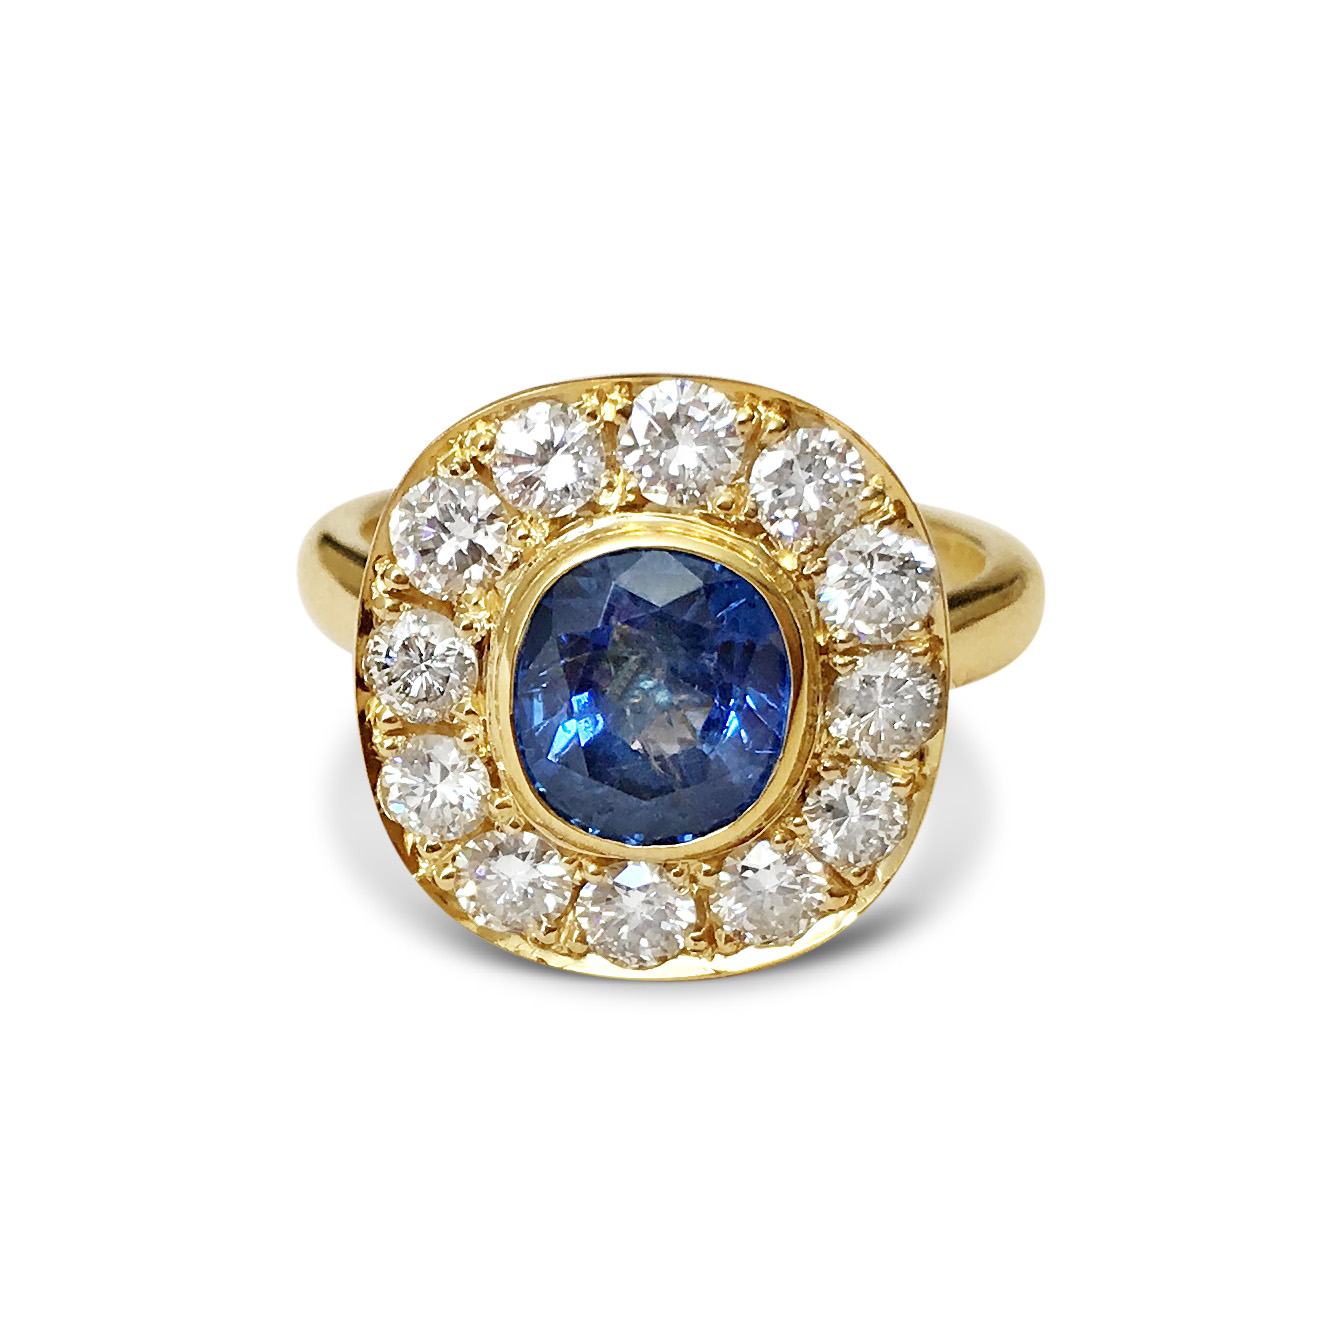 Sapphire-and-diamond-cluster-engagement-ring-in-yellow-gold.jpg